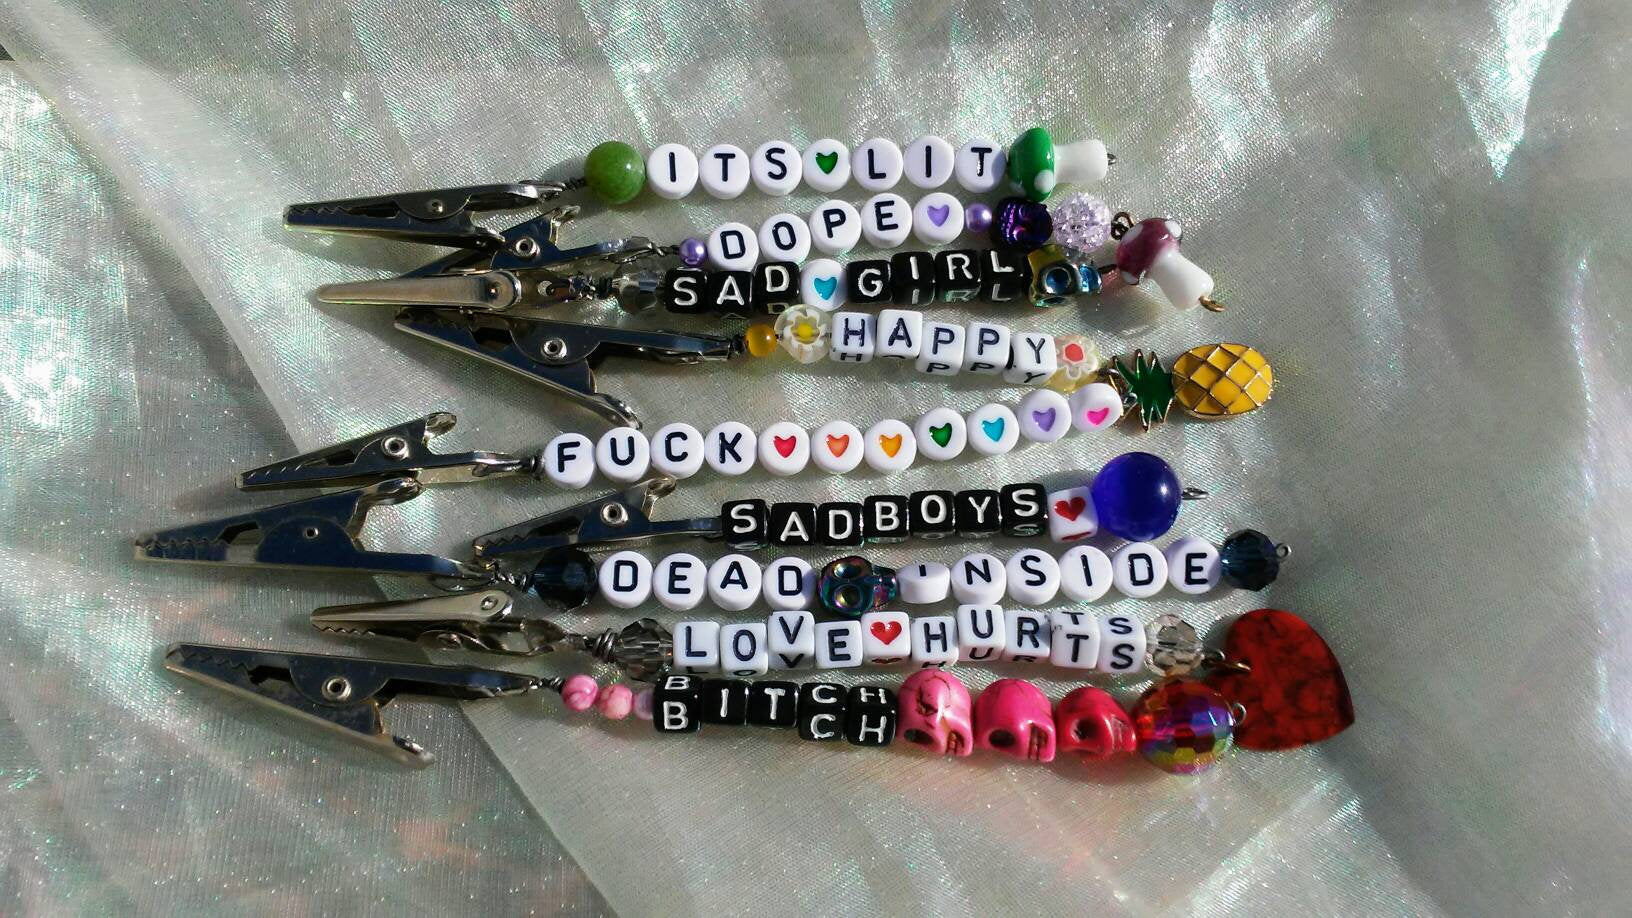 beaded roach clips are NOW available! ONLY on tiktok shop! One of